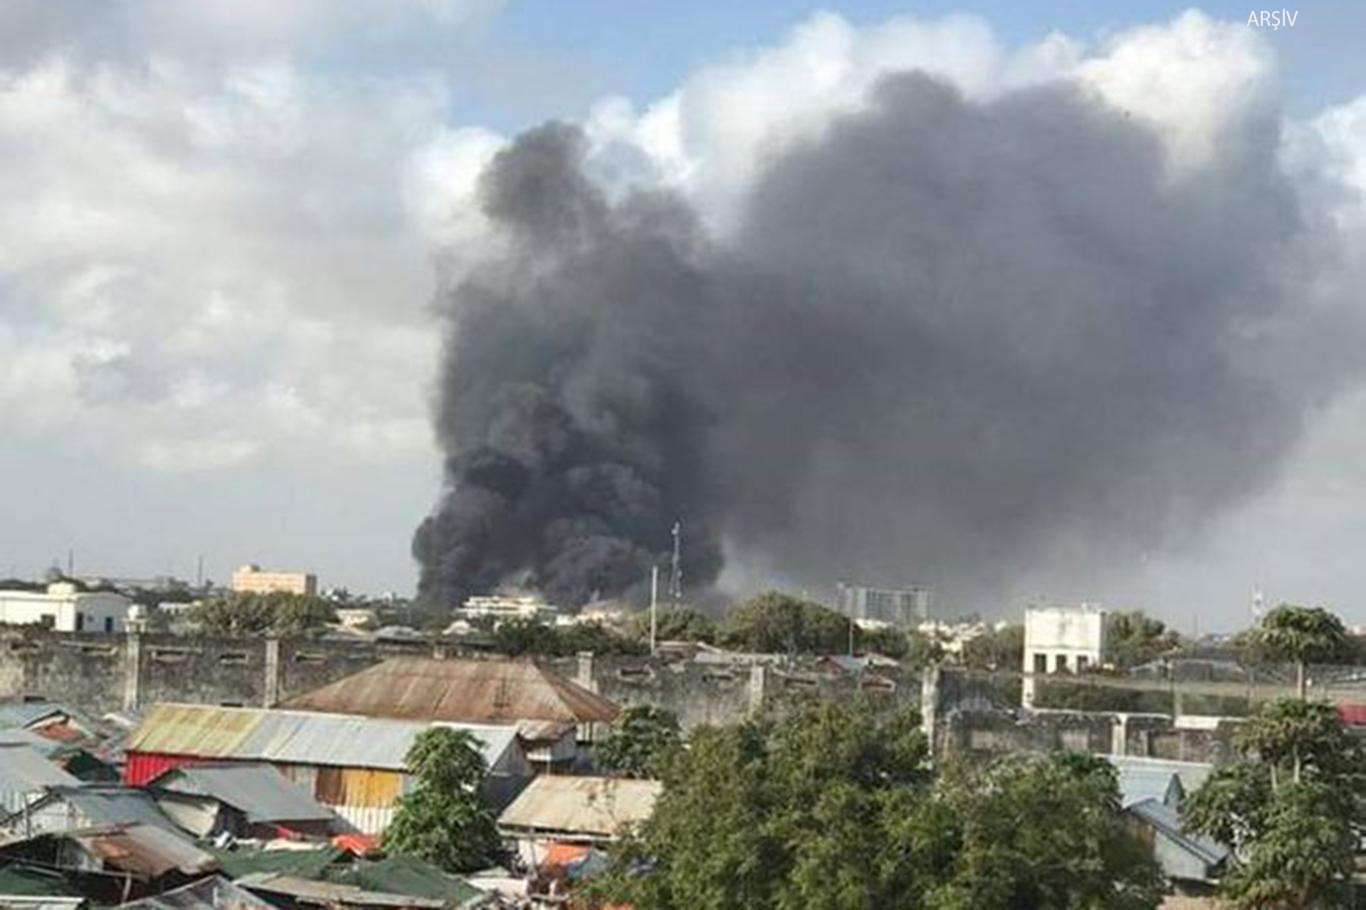 At least 20 people killed in suicide attack in Somalia’s capital